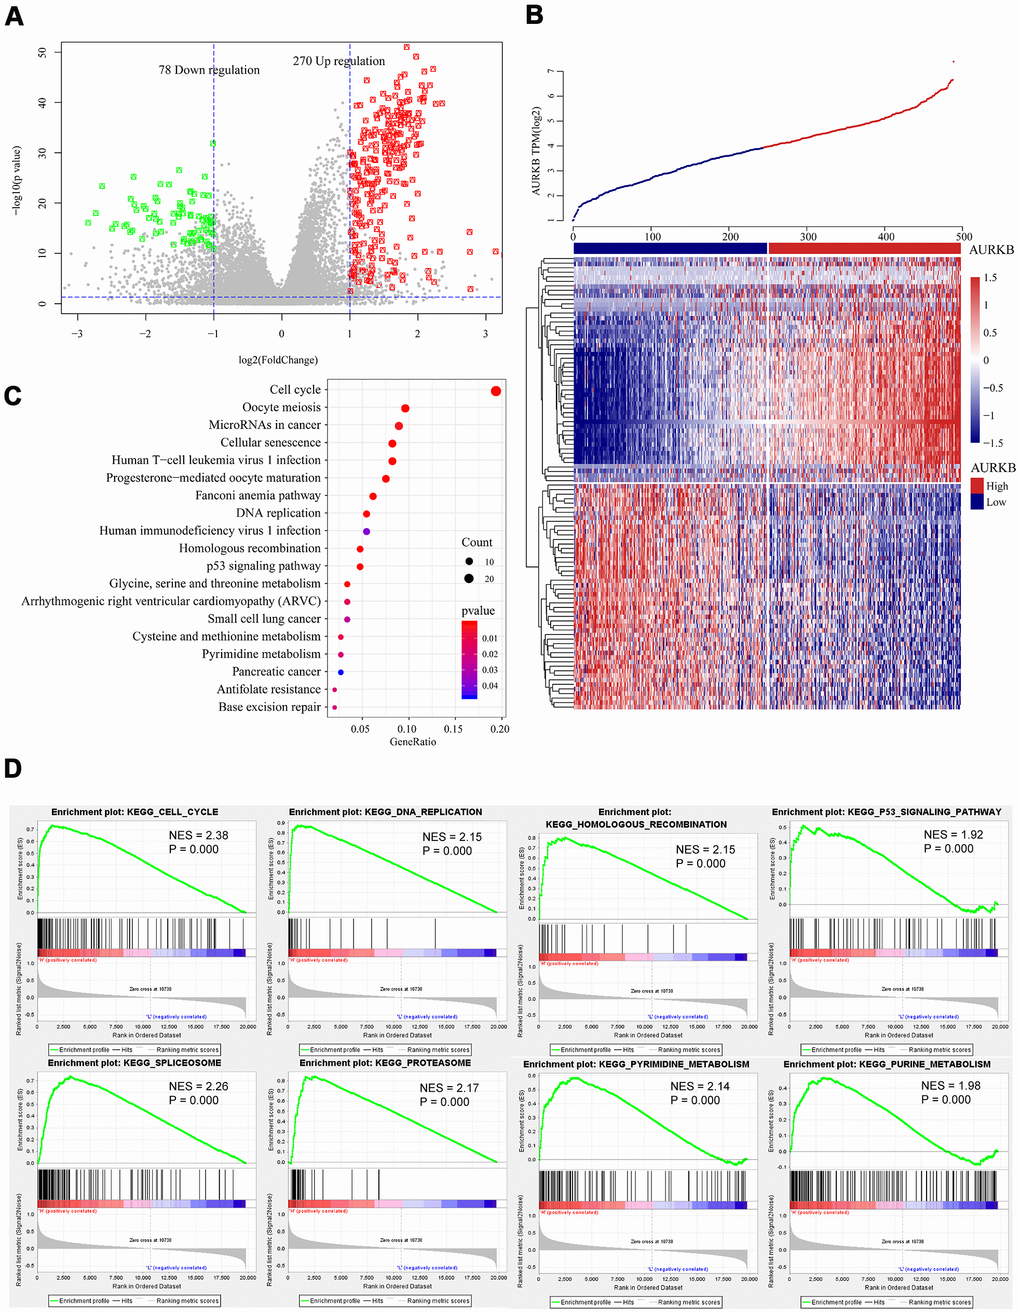 Genome-wide mRNA profiles associated with AURKB expression. (A, B) Volcano plot and heatmap showed the distribution and cluster of DEGs between AURKBhigh and AURKBlow patients. (C) Top 20 pathways were identified through KEGG enrichment analysis by ClusterProfiler R-package, including cell cycle, DNA replication, homologous recombination, and p53 signaling pathway, etc. (D) Significant pathways enriched by GSEA analysis of DEGs between AURKBhigh and AURKBlow patients were shown here: cell cycle, DNA replication, homologous recombination, p53 signaling pathway, spliceosome, proteasome, pyrimidine metabolism, and purine metabolism. Positive values indicate a higher correlation with AURKBhigh patients, while negative values indicate association with AURKBlow patients.